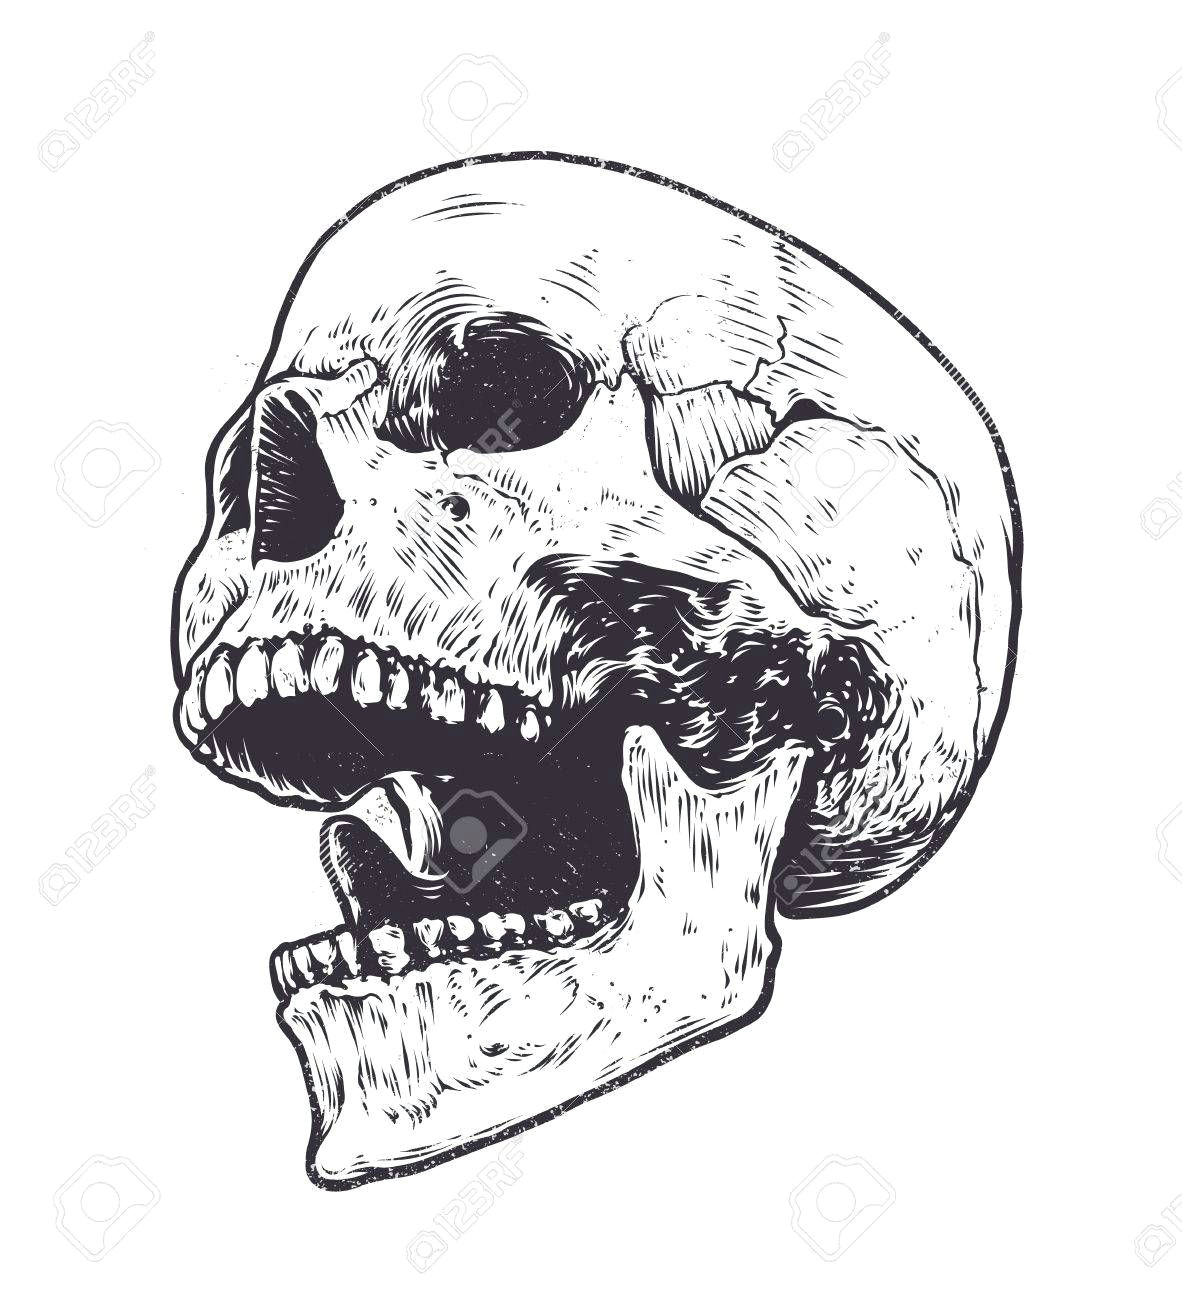 Skull Drawing.com Image Result for Skull Open Mouth Drawing Tattoo Projects